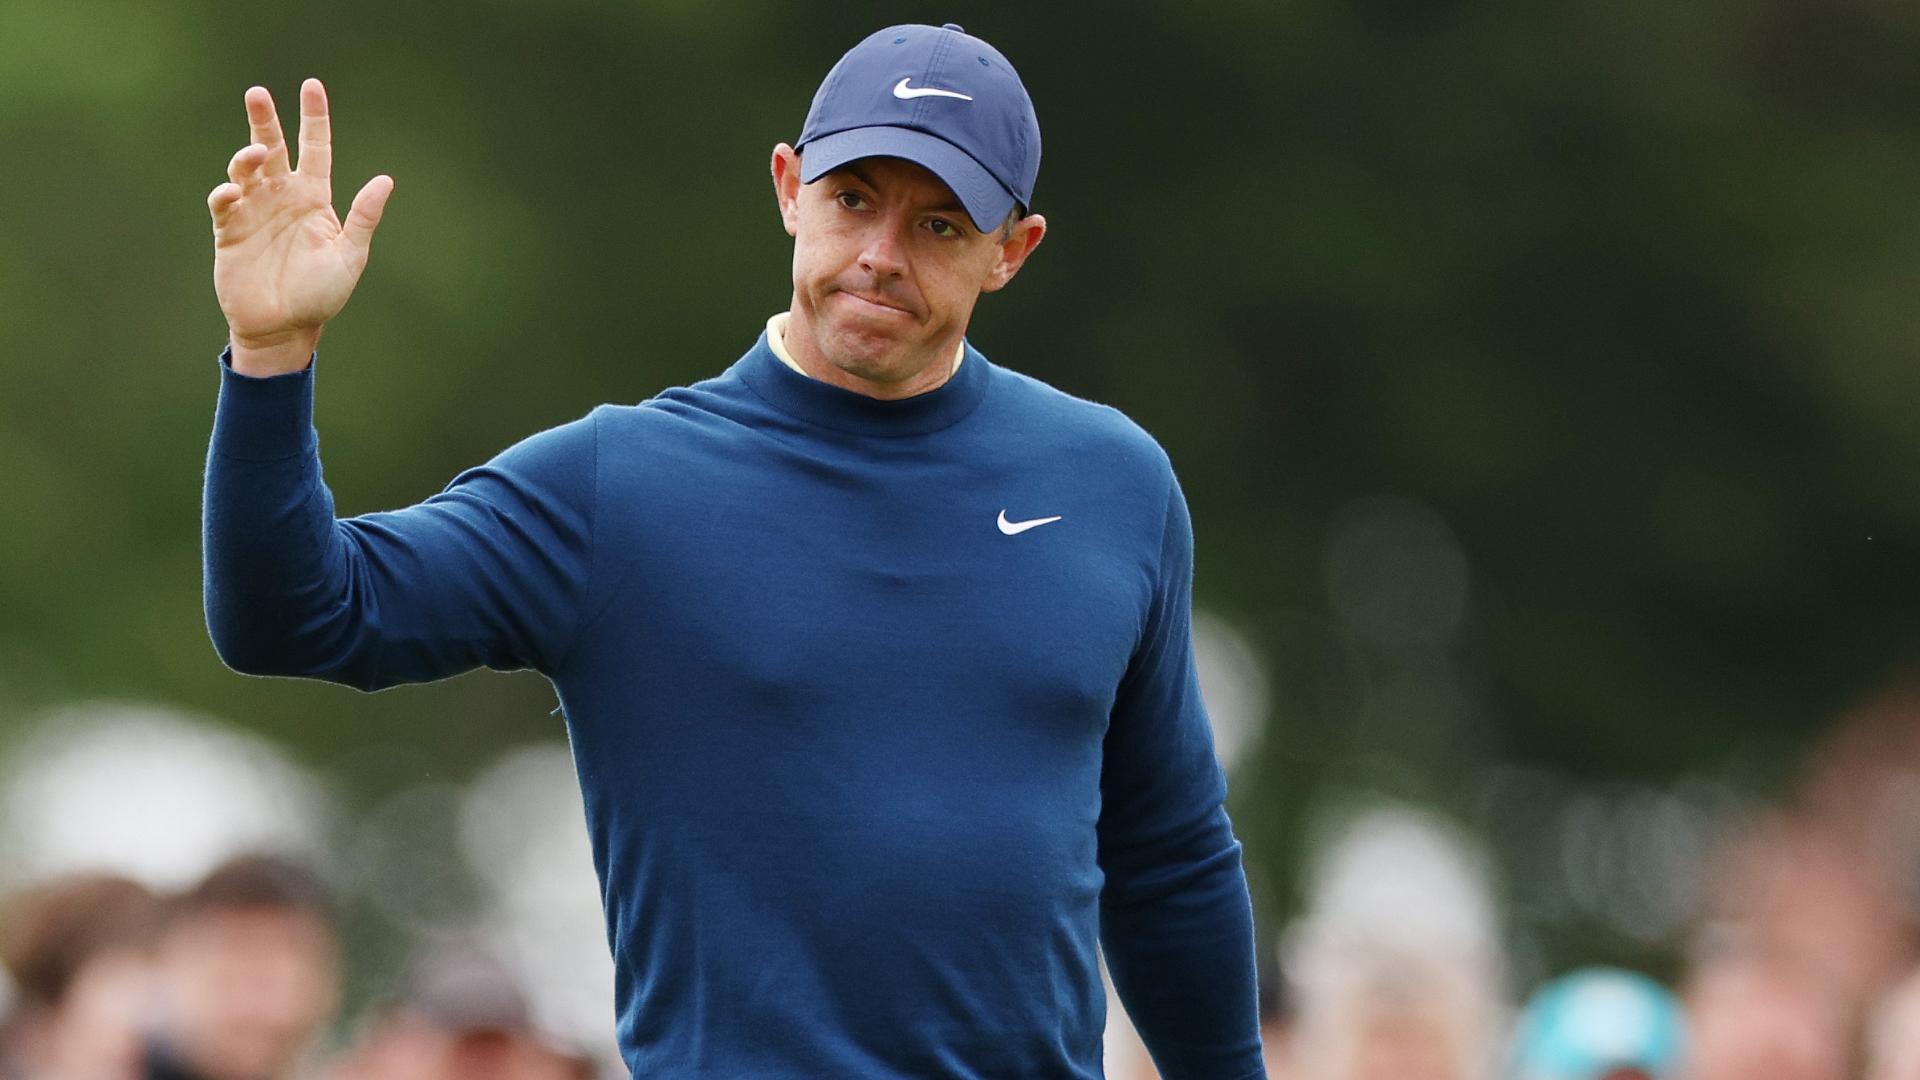 McIlroy chips in for eagle at Genesis Scottish Open